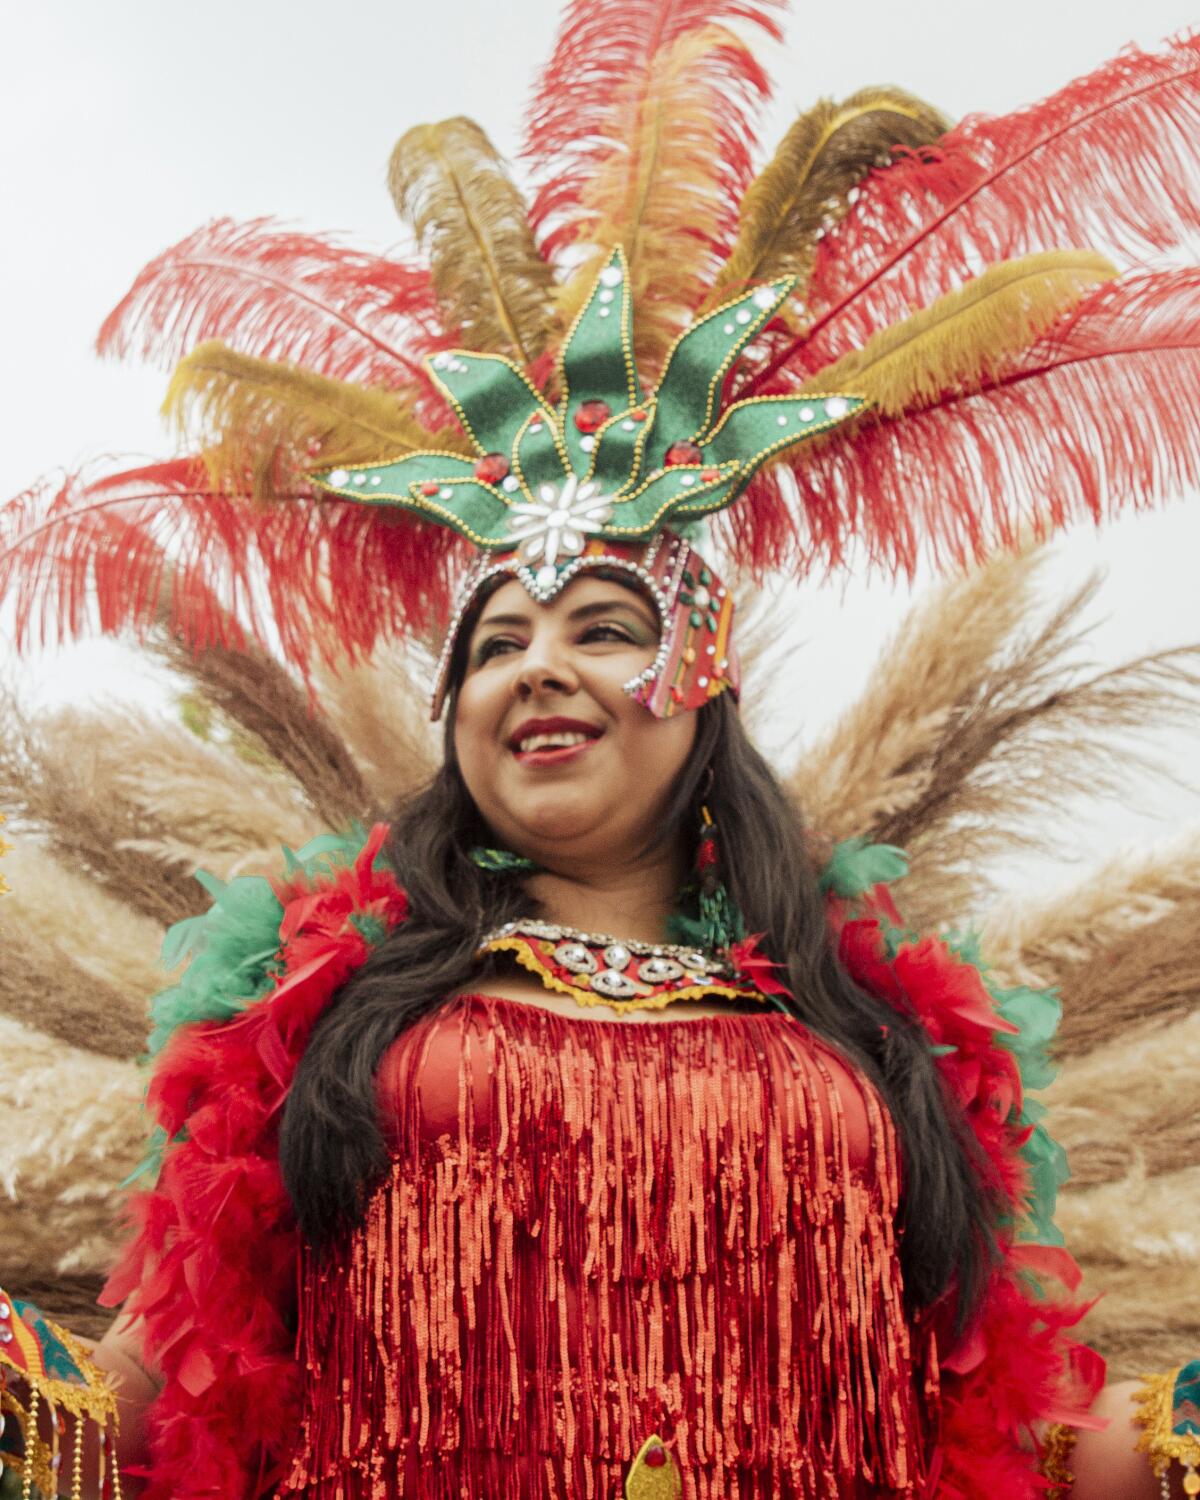 A woman wears a green headdress with red plumes and a red top.